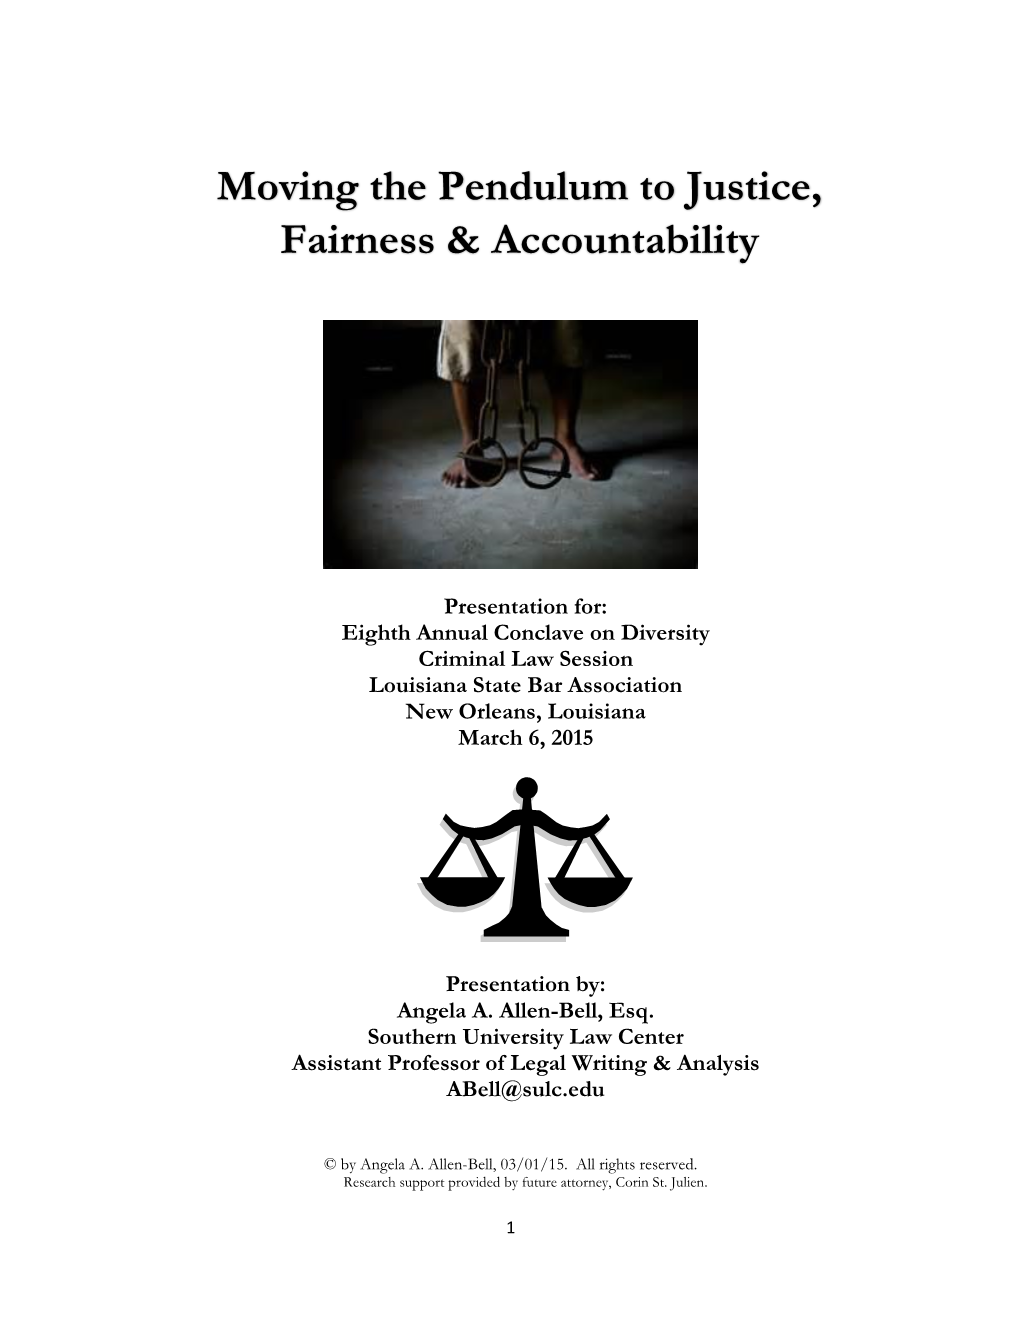 Moving the Pendulum to Justice, Fairness & Accountability